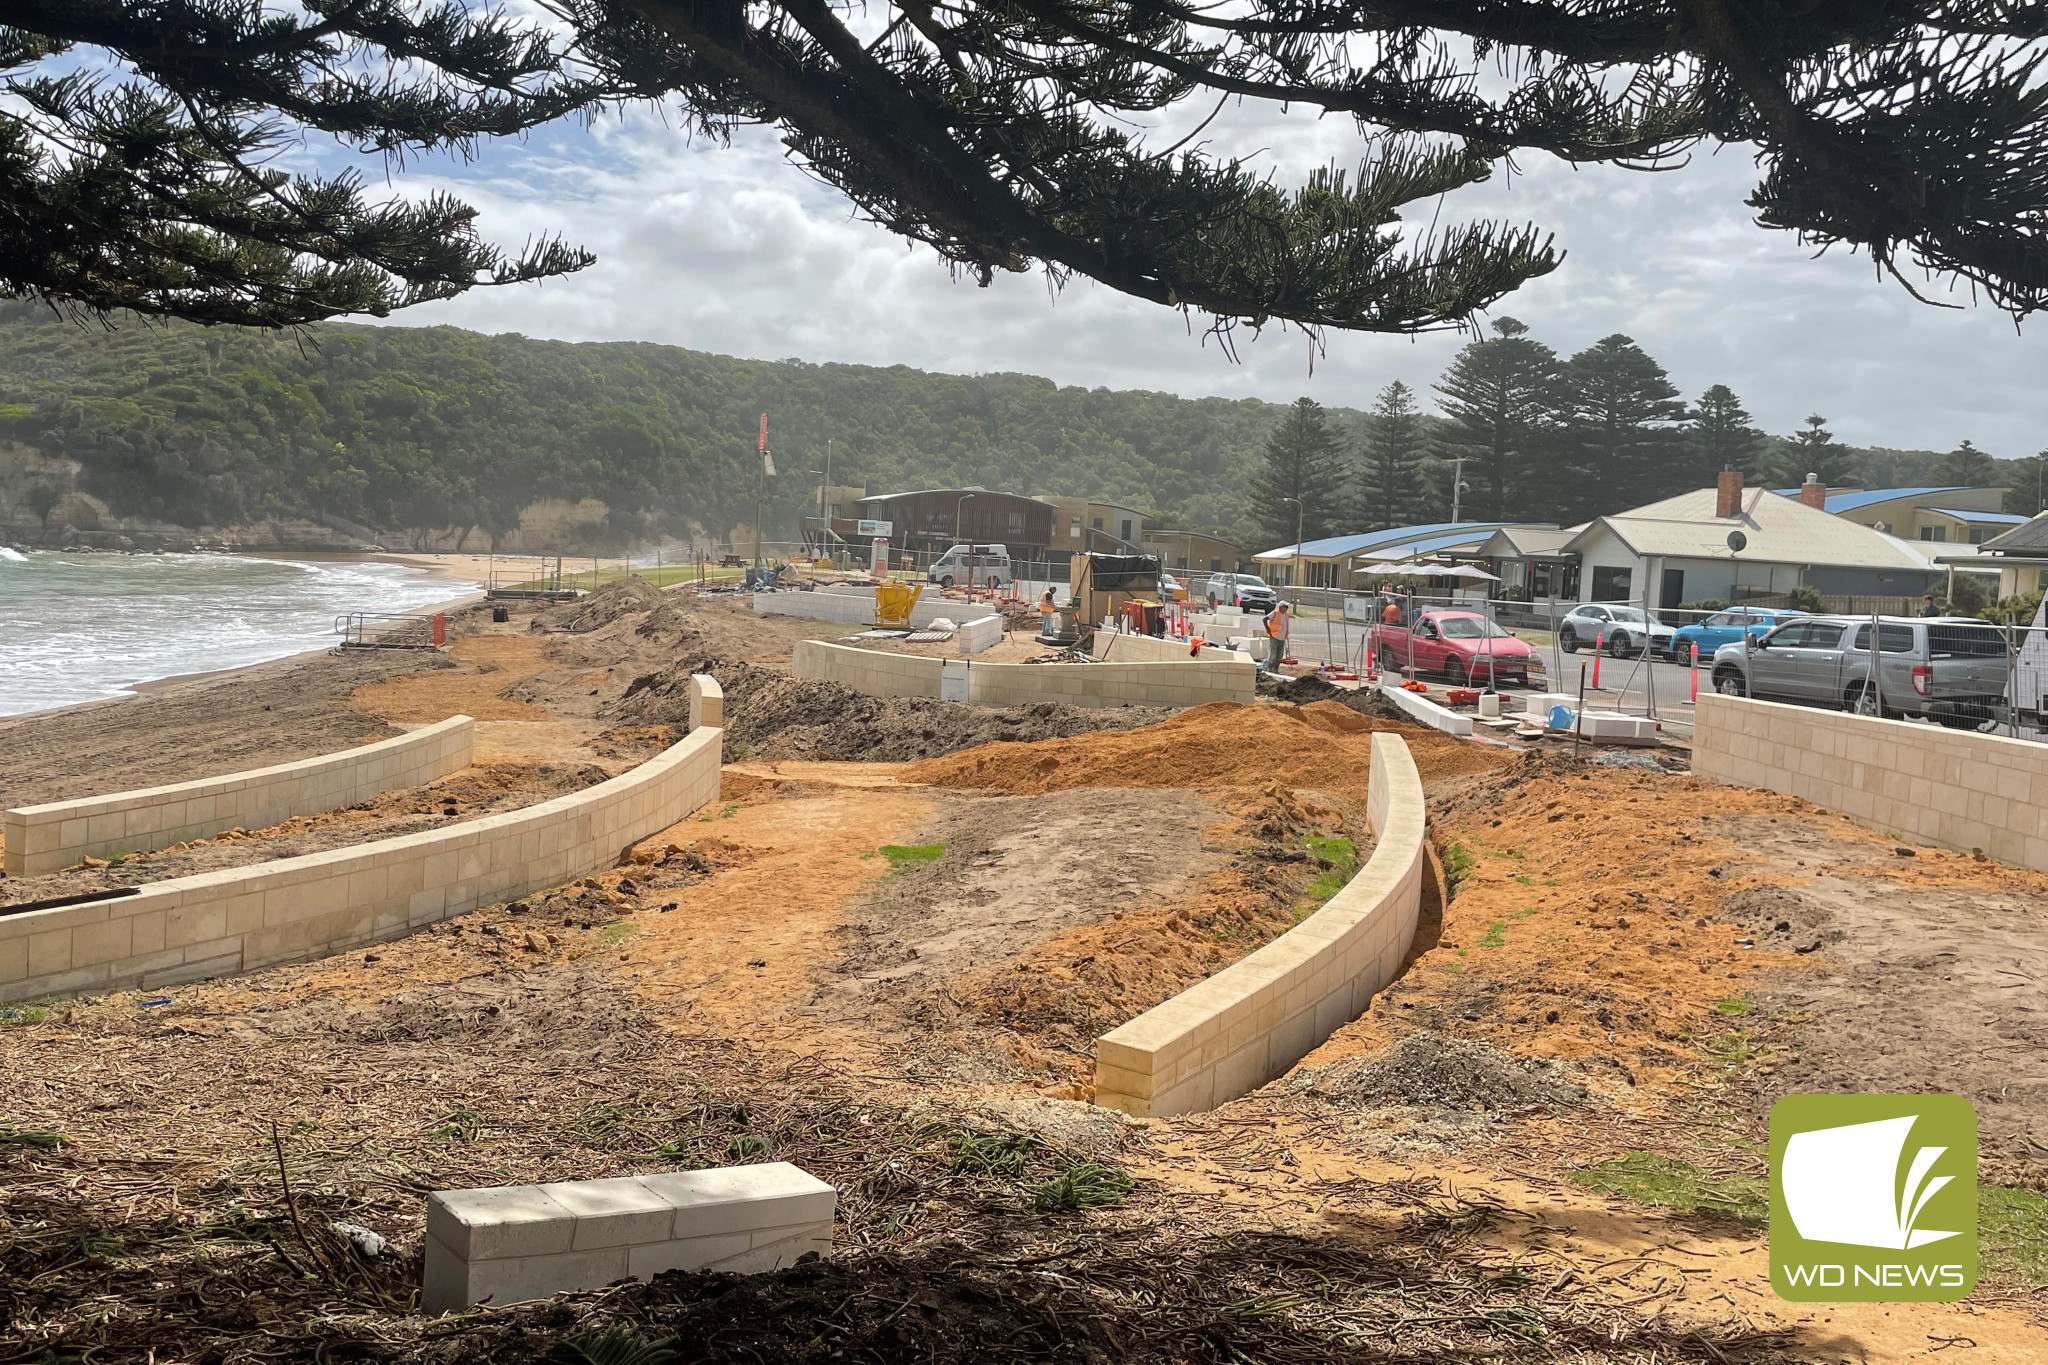 Update: Works are continuing on the Port Campbell Town Centre Project with contractors starting a section near the Rocket Shed and also on the foreshore.